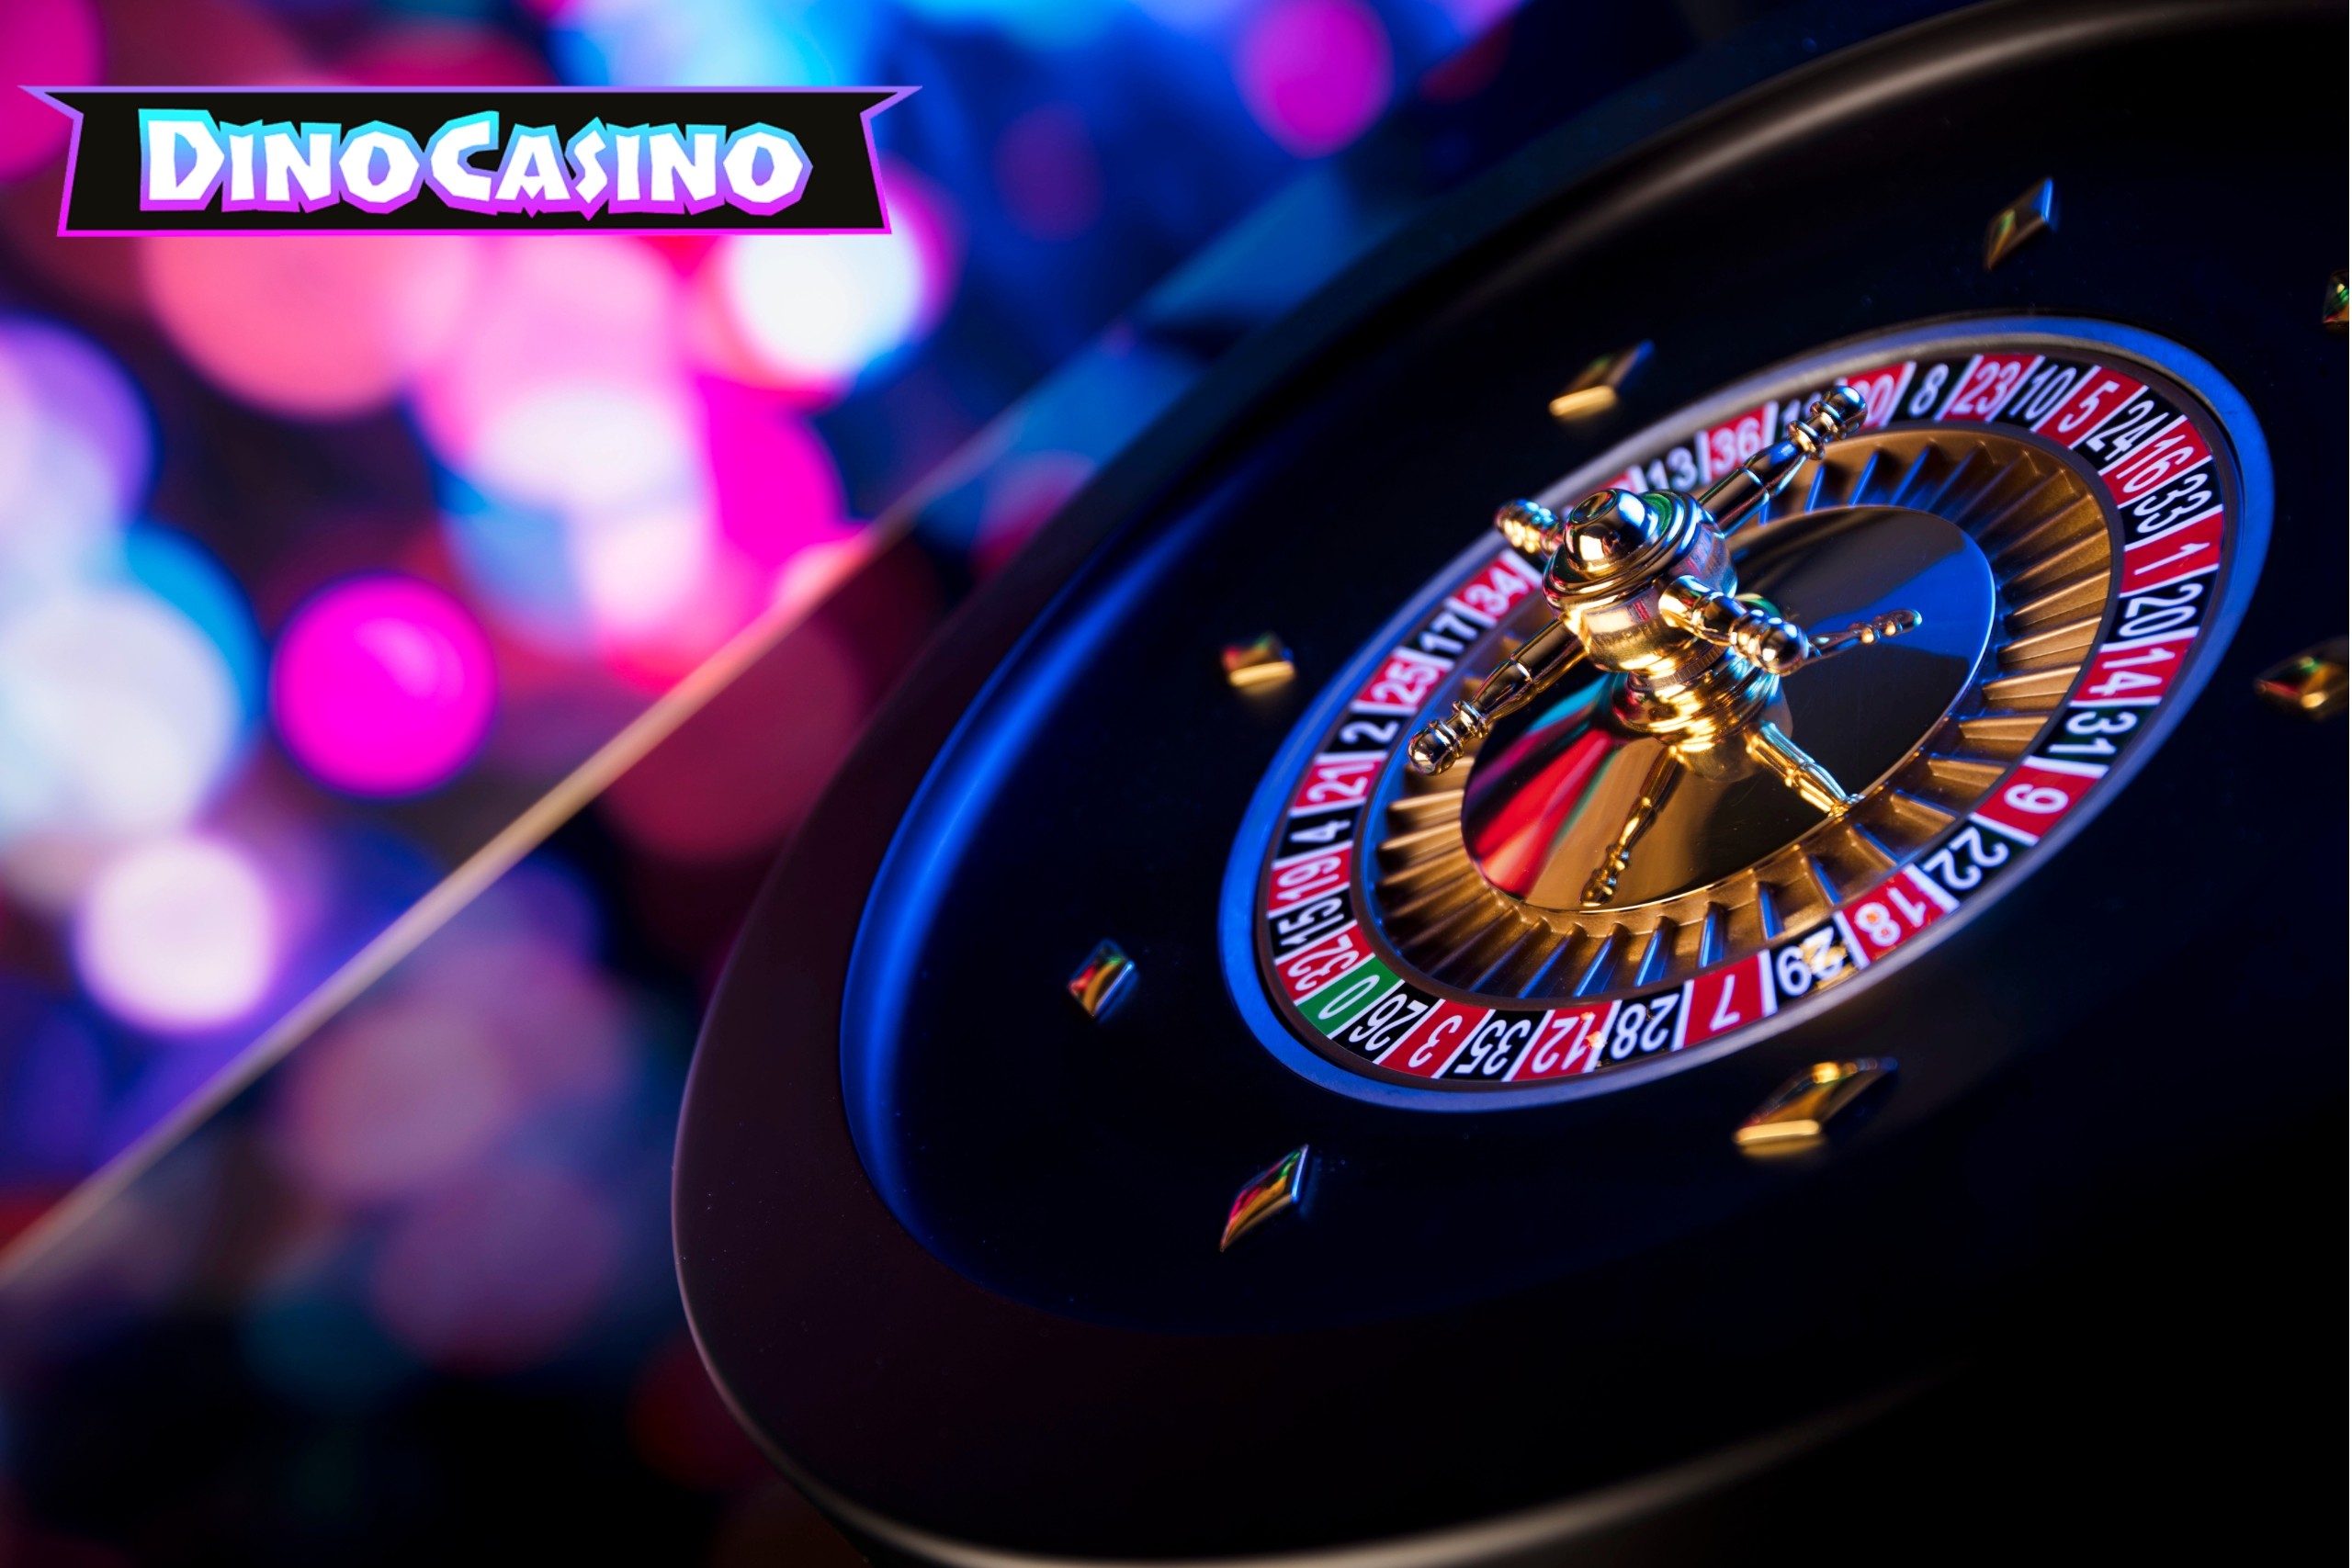 Free Casino Fun: Discovering Entertainment Without Financial Risk